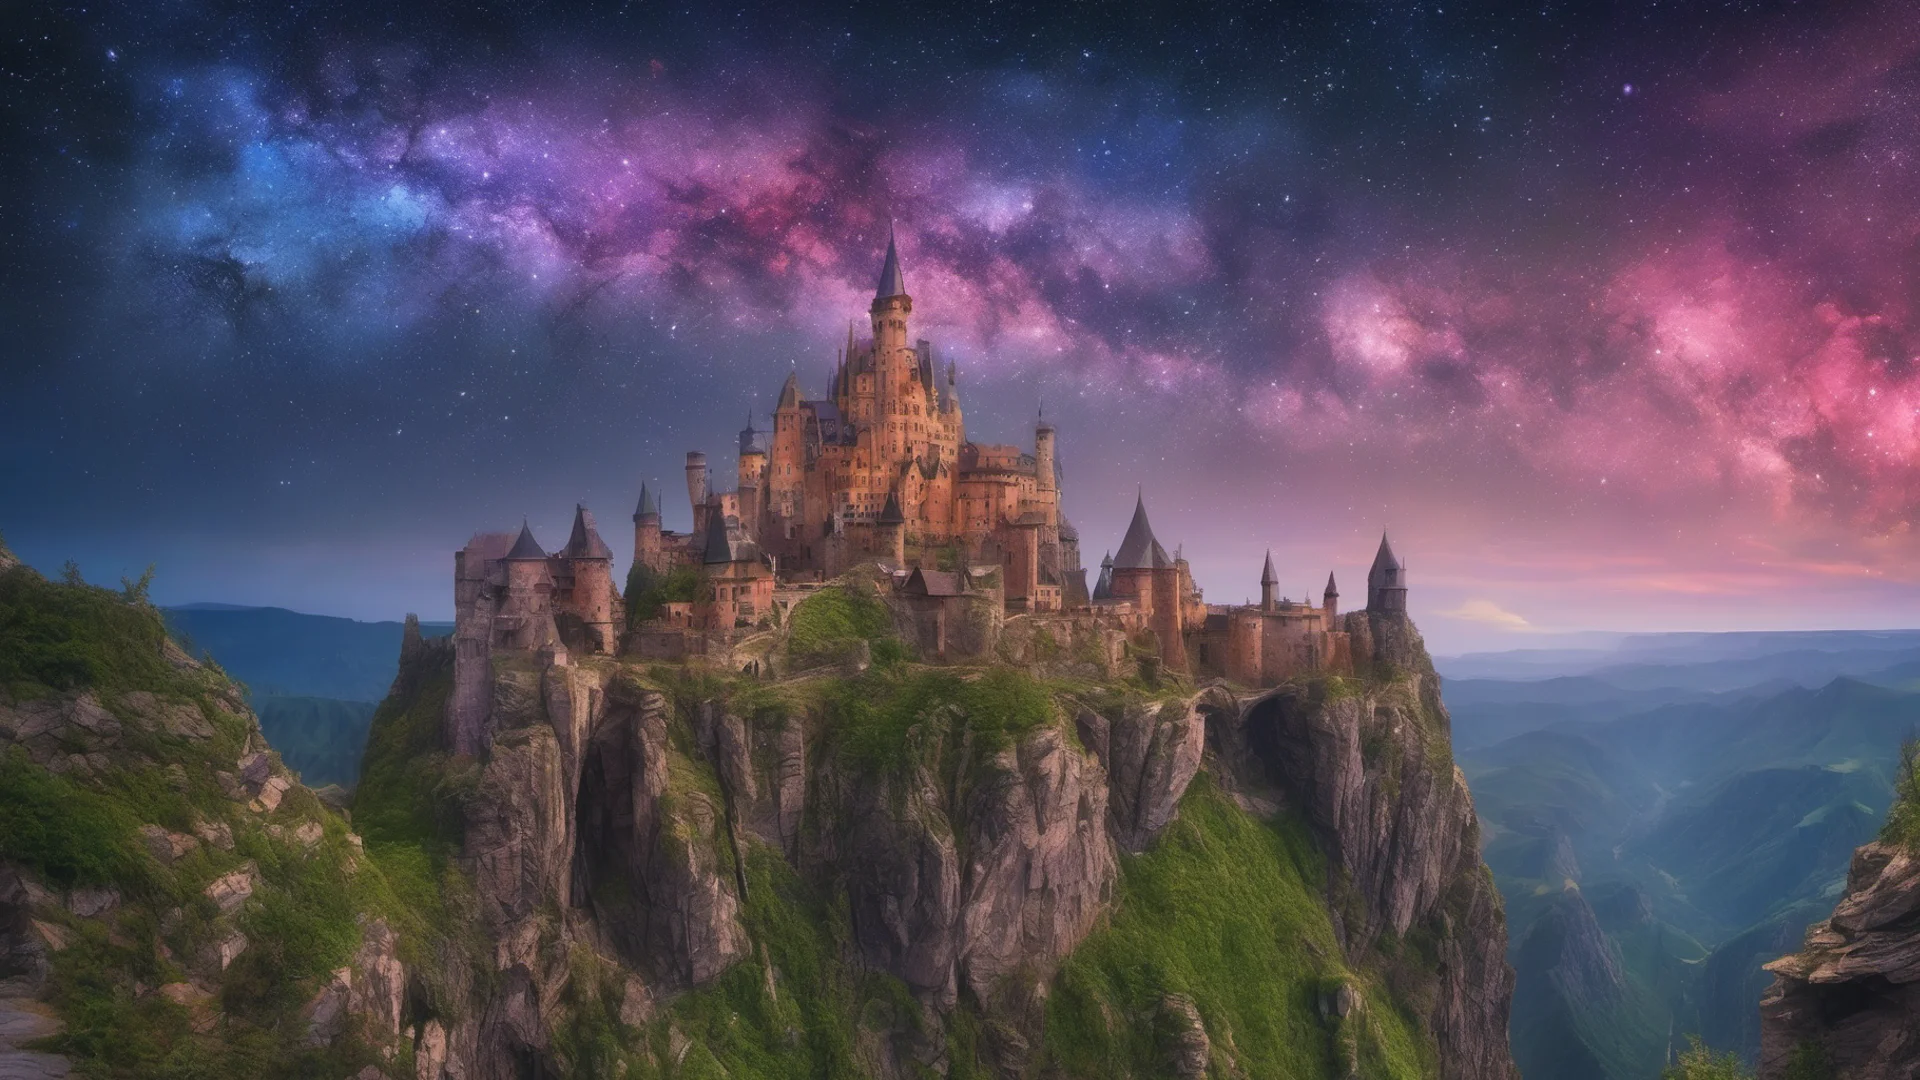 castle unreal landscape amazing starry colorful galaxies in sky steep cliffs overhangs  amazing awesome portrait 2 wide